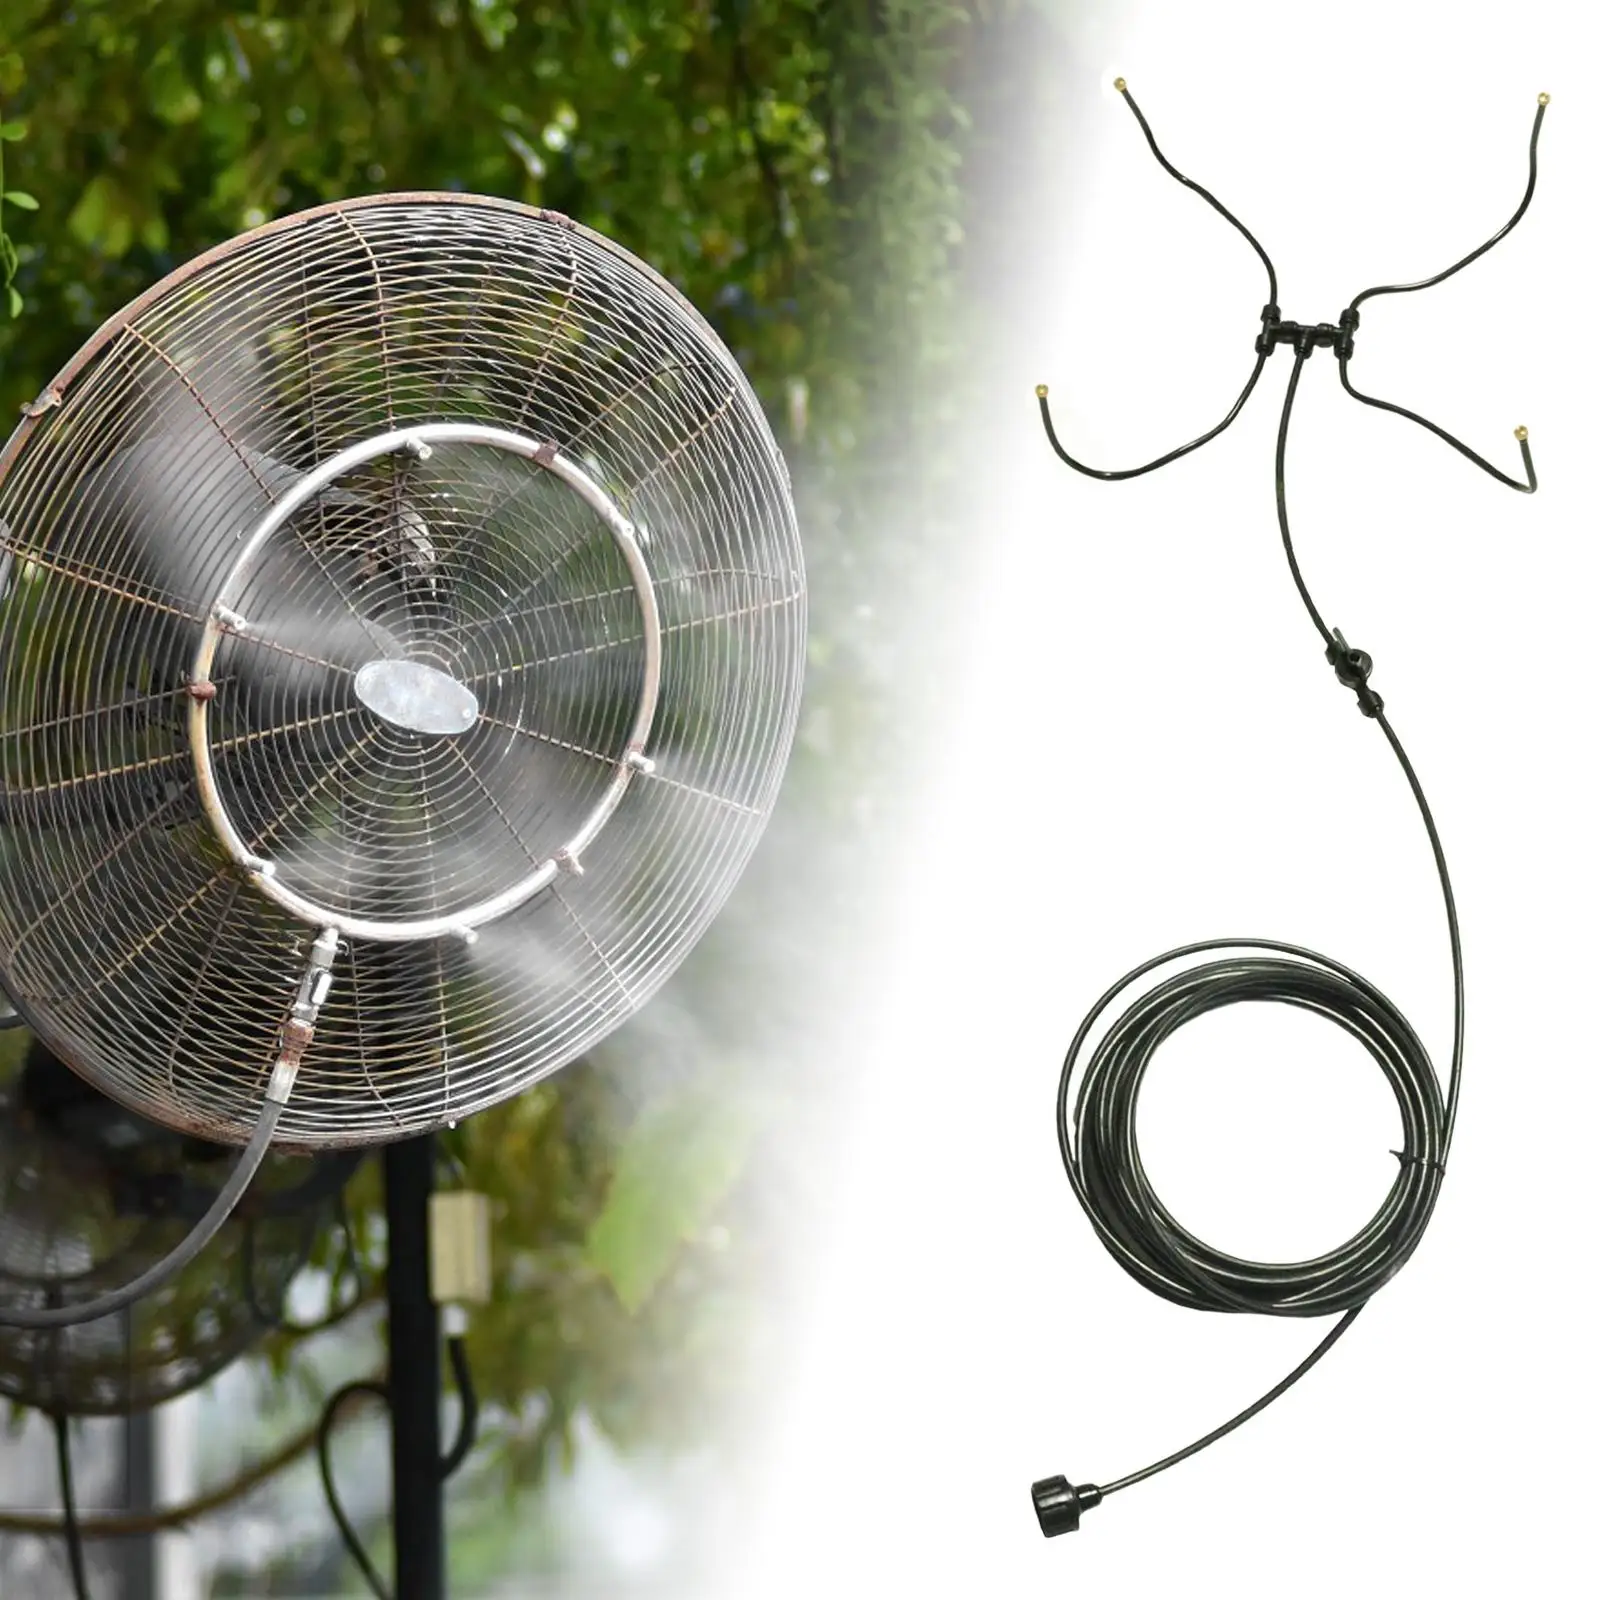 Fan Misting Kits for Outdoor Cooling Portable Rotatable Misting Nozzles 19.6 ft Misting Line for Deck Porch Patio Outside